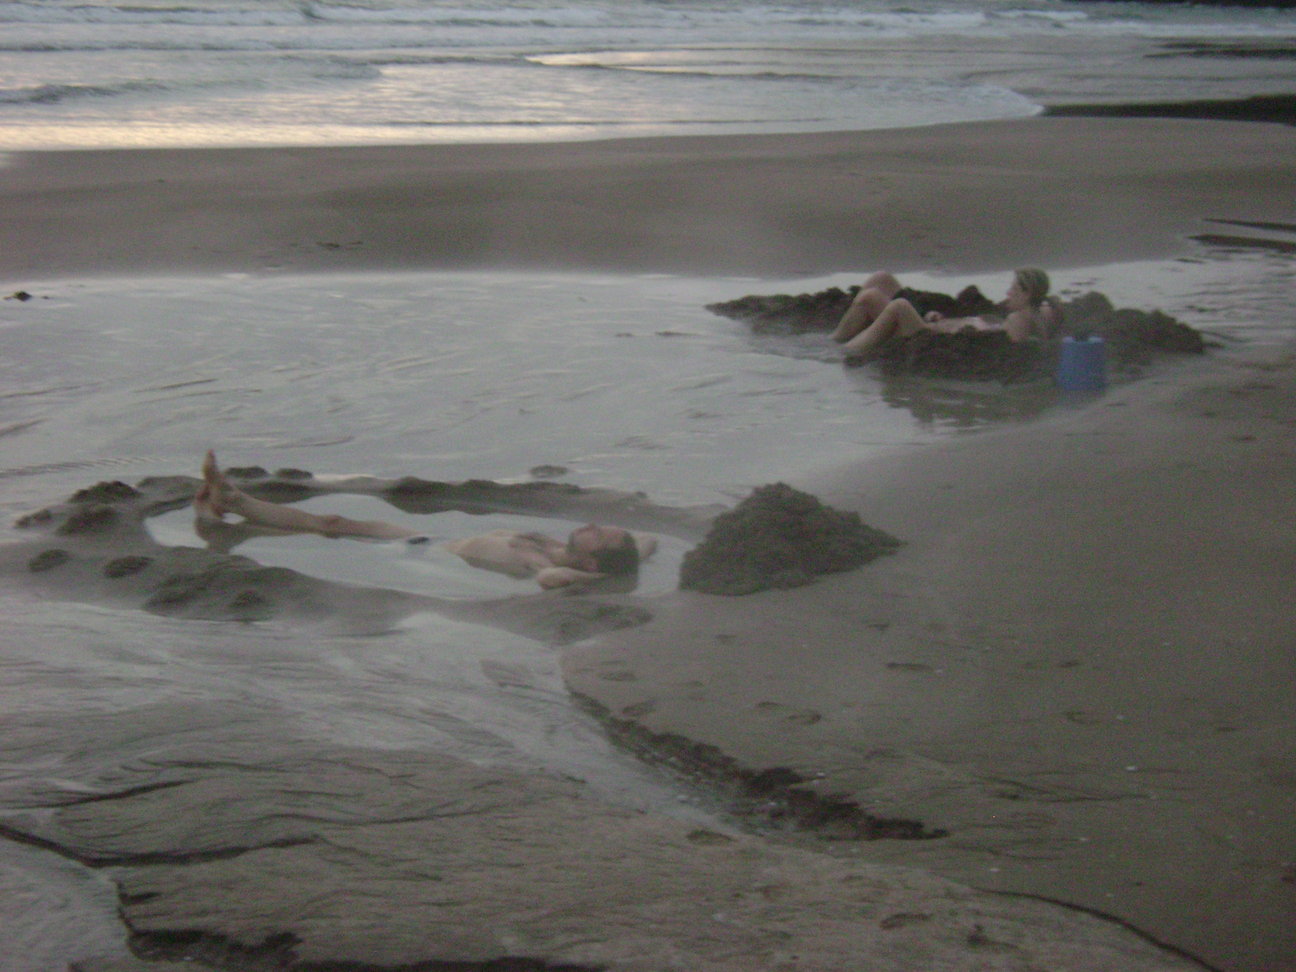 Downward view of a person laying in a watery hole on a beach, with a couple people laying in a sandy pit near them